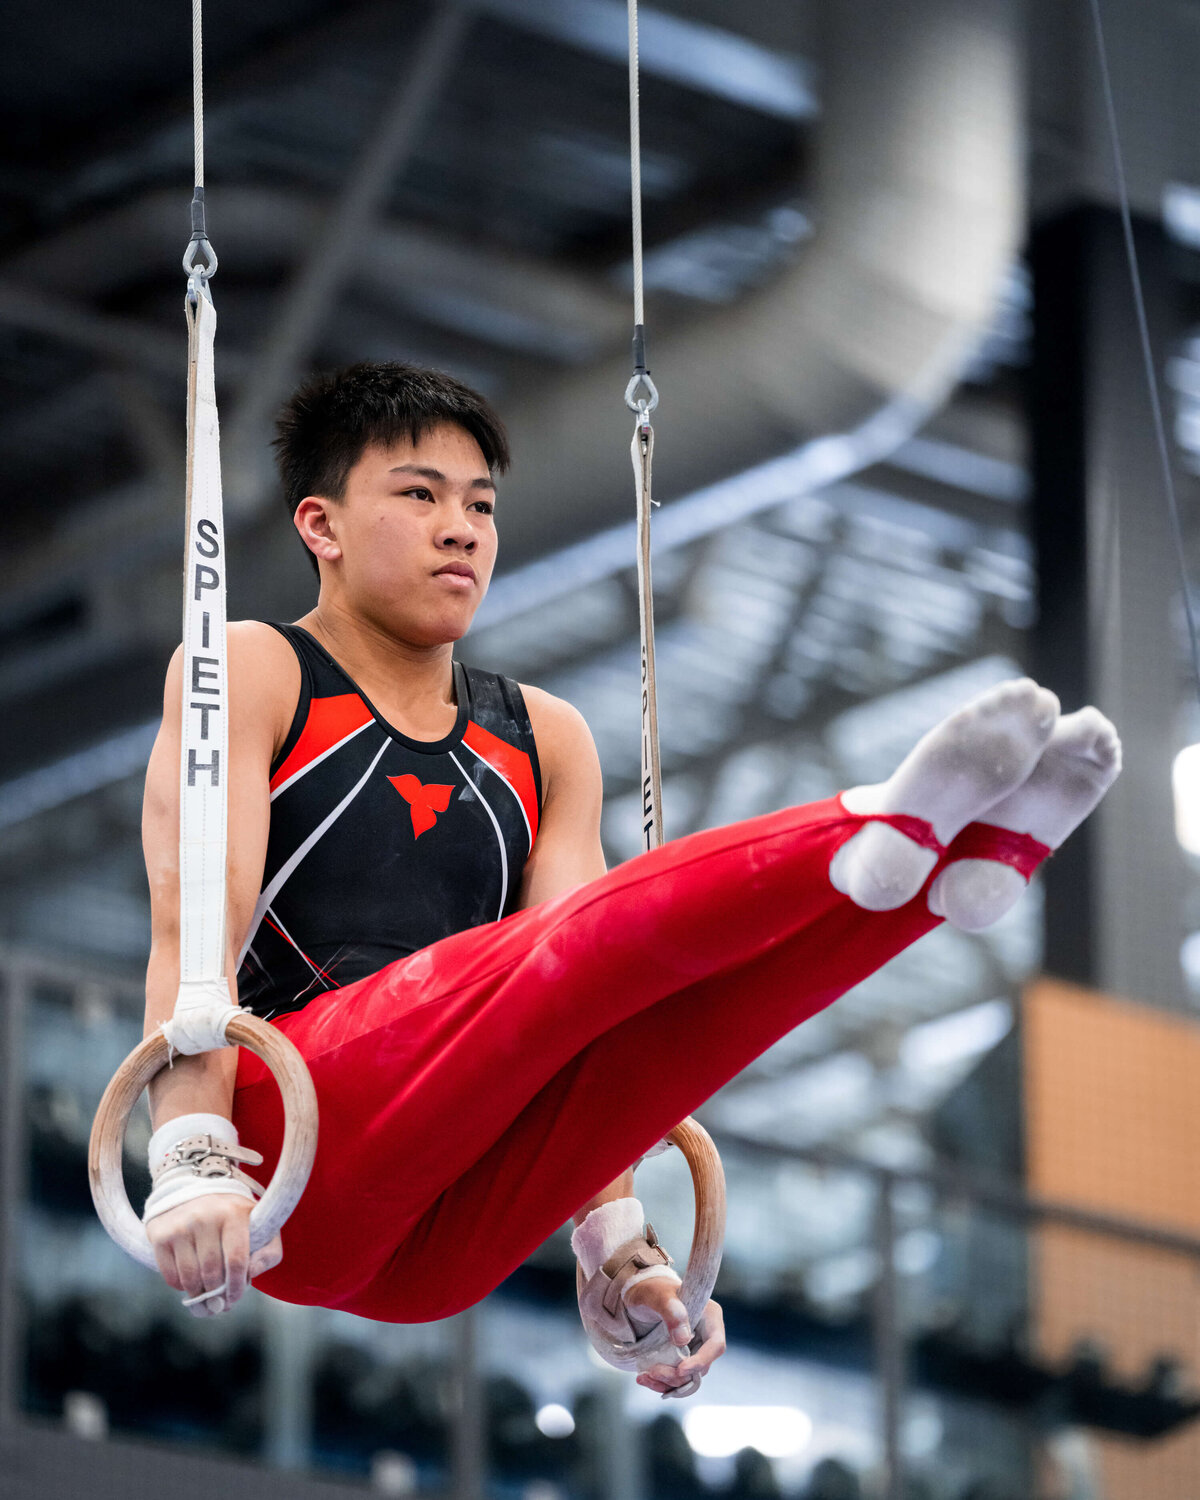 Photo by Luke O'Geil taken at the 2023 inaugural Grizzly Classic men's artistic gymnastics competitionA1_04134